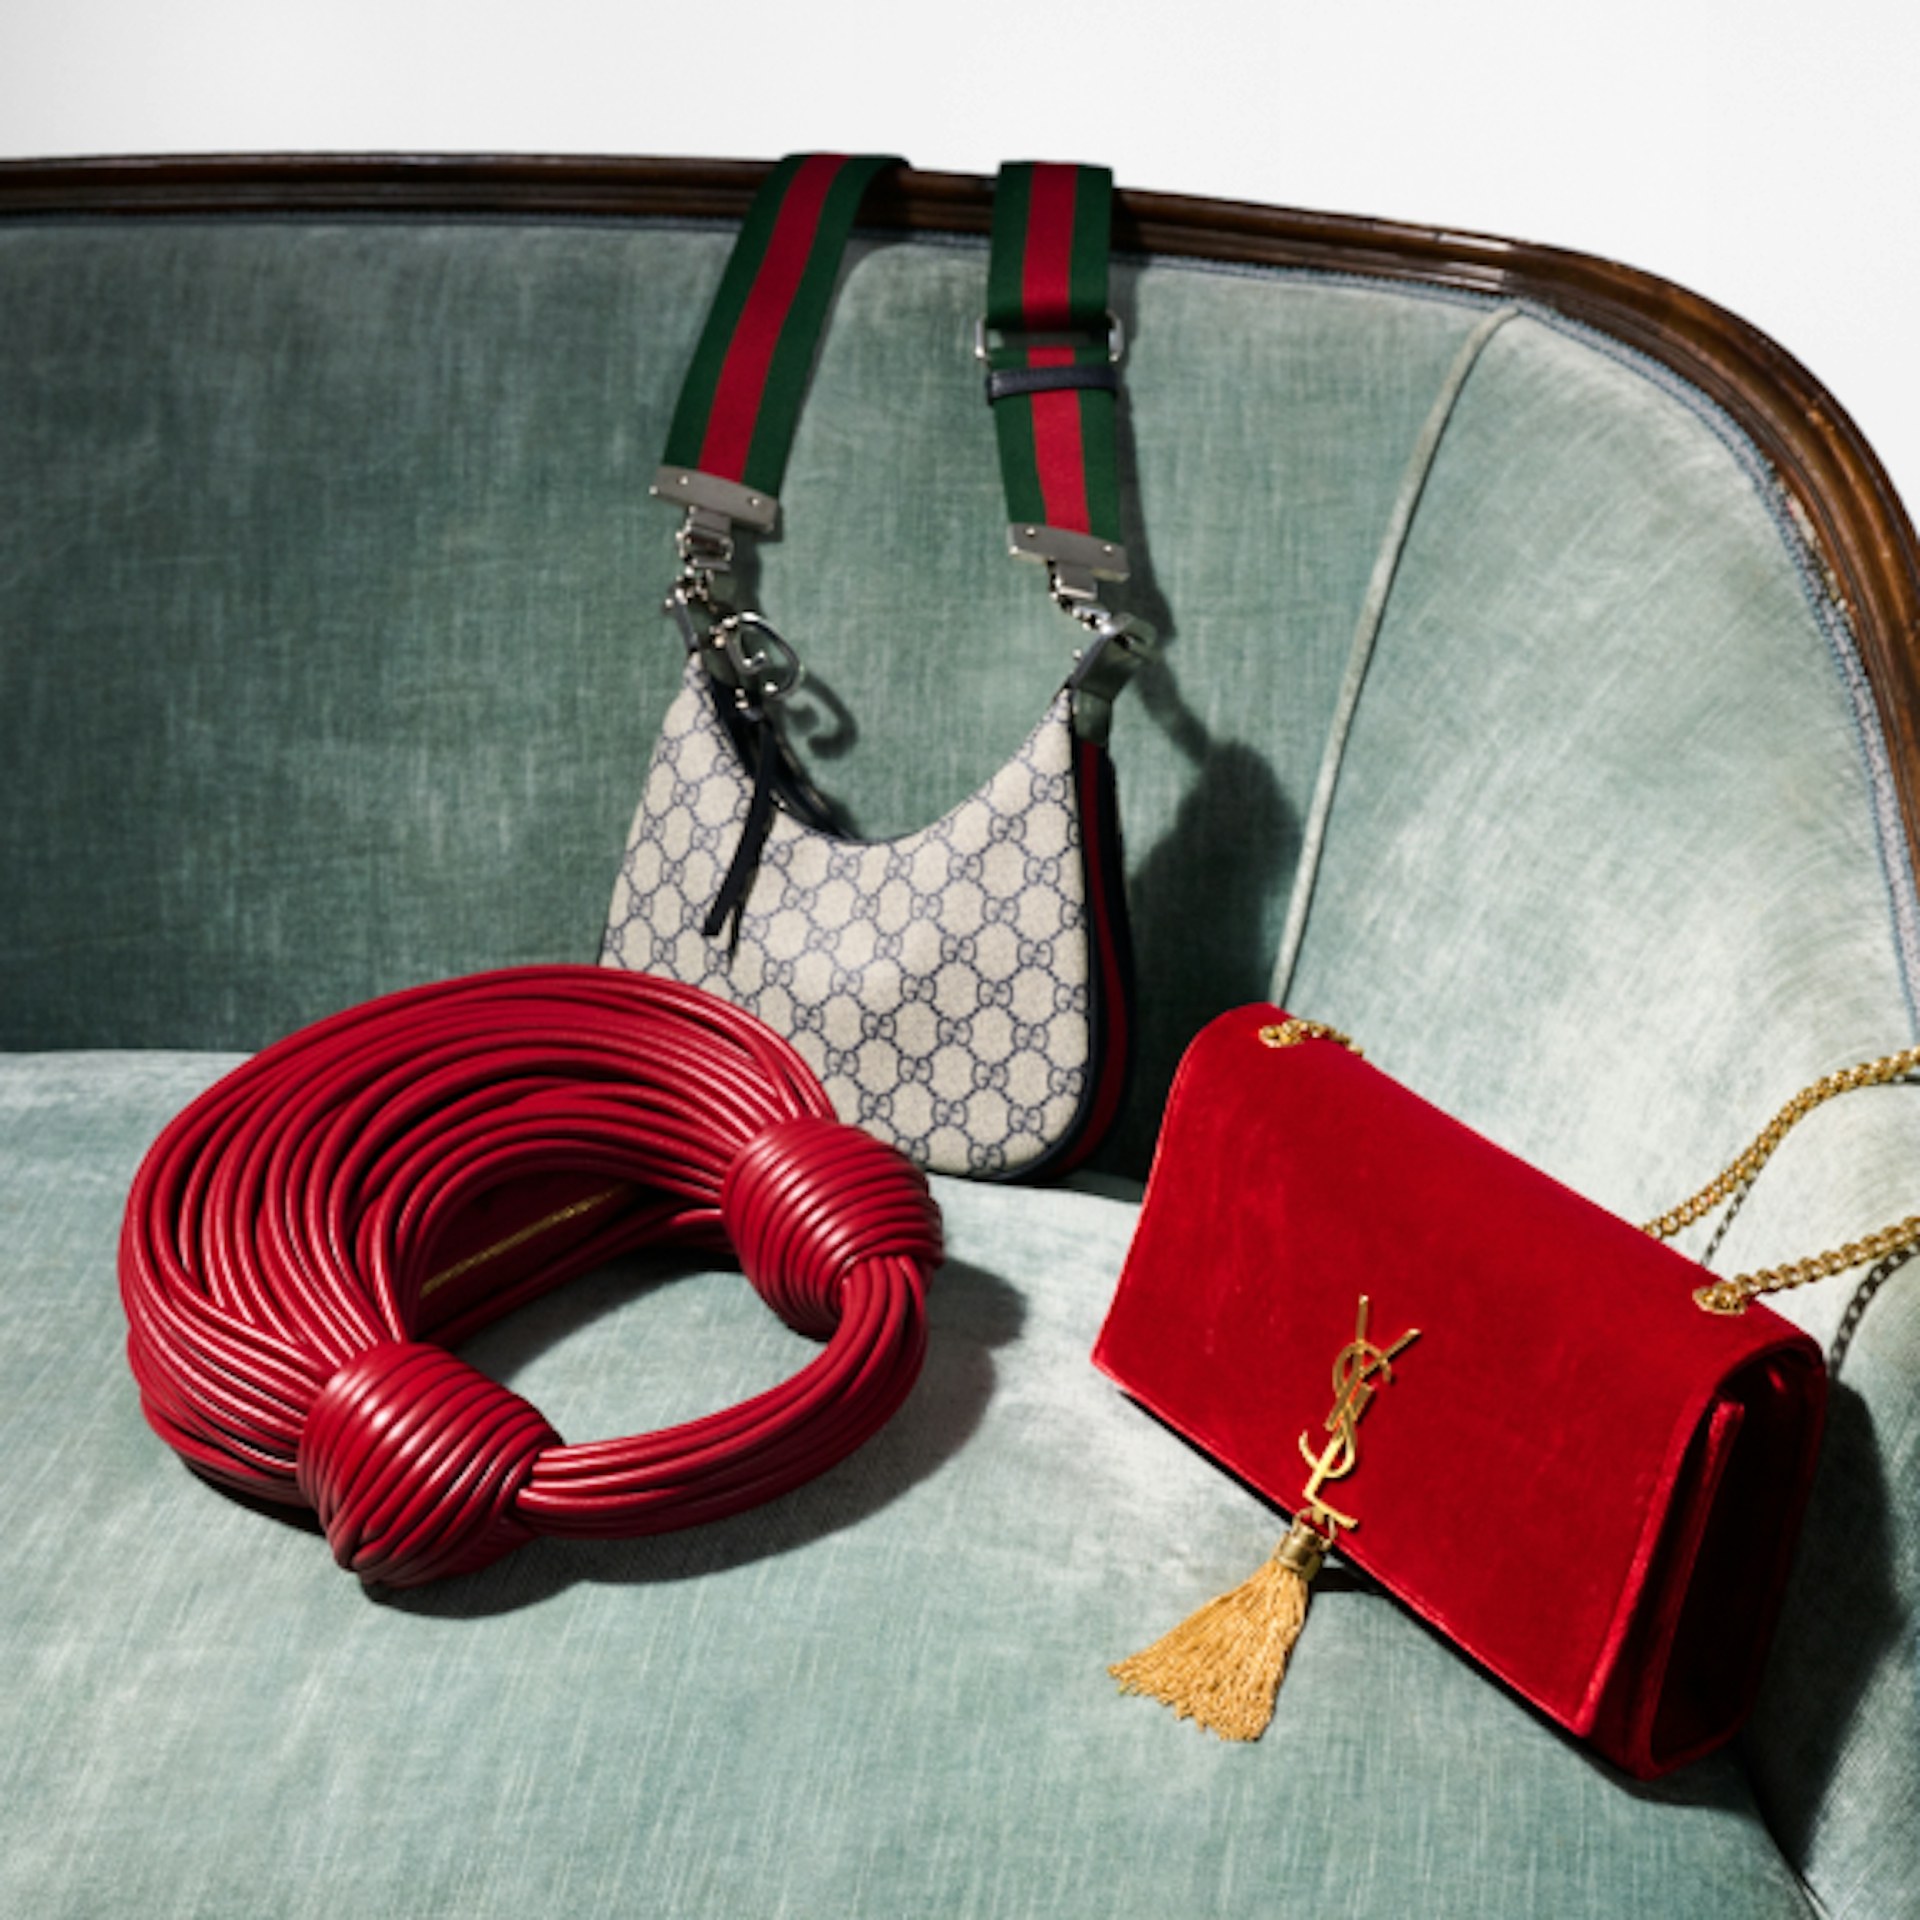 The image displays three stylish handbags arranged on a green velvet sofa. One is a white Gucci bag with green and red striped straps, the second is a unique red coiled design, and the third is a red YSL bag with a gold tassel and chain strap.